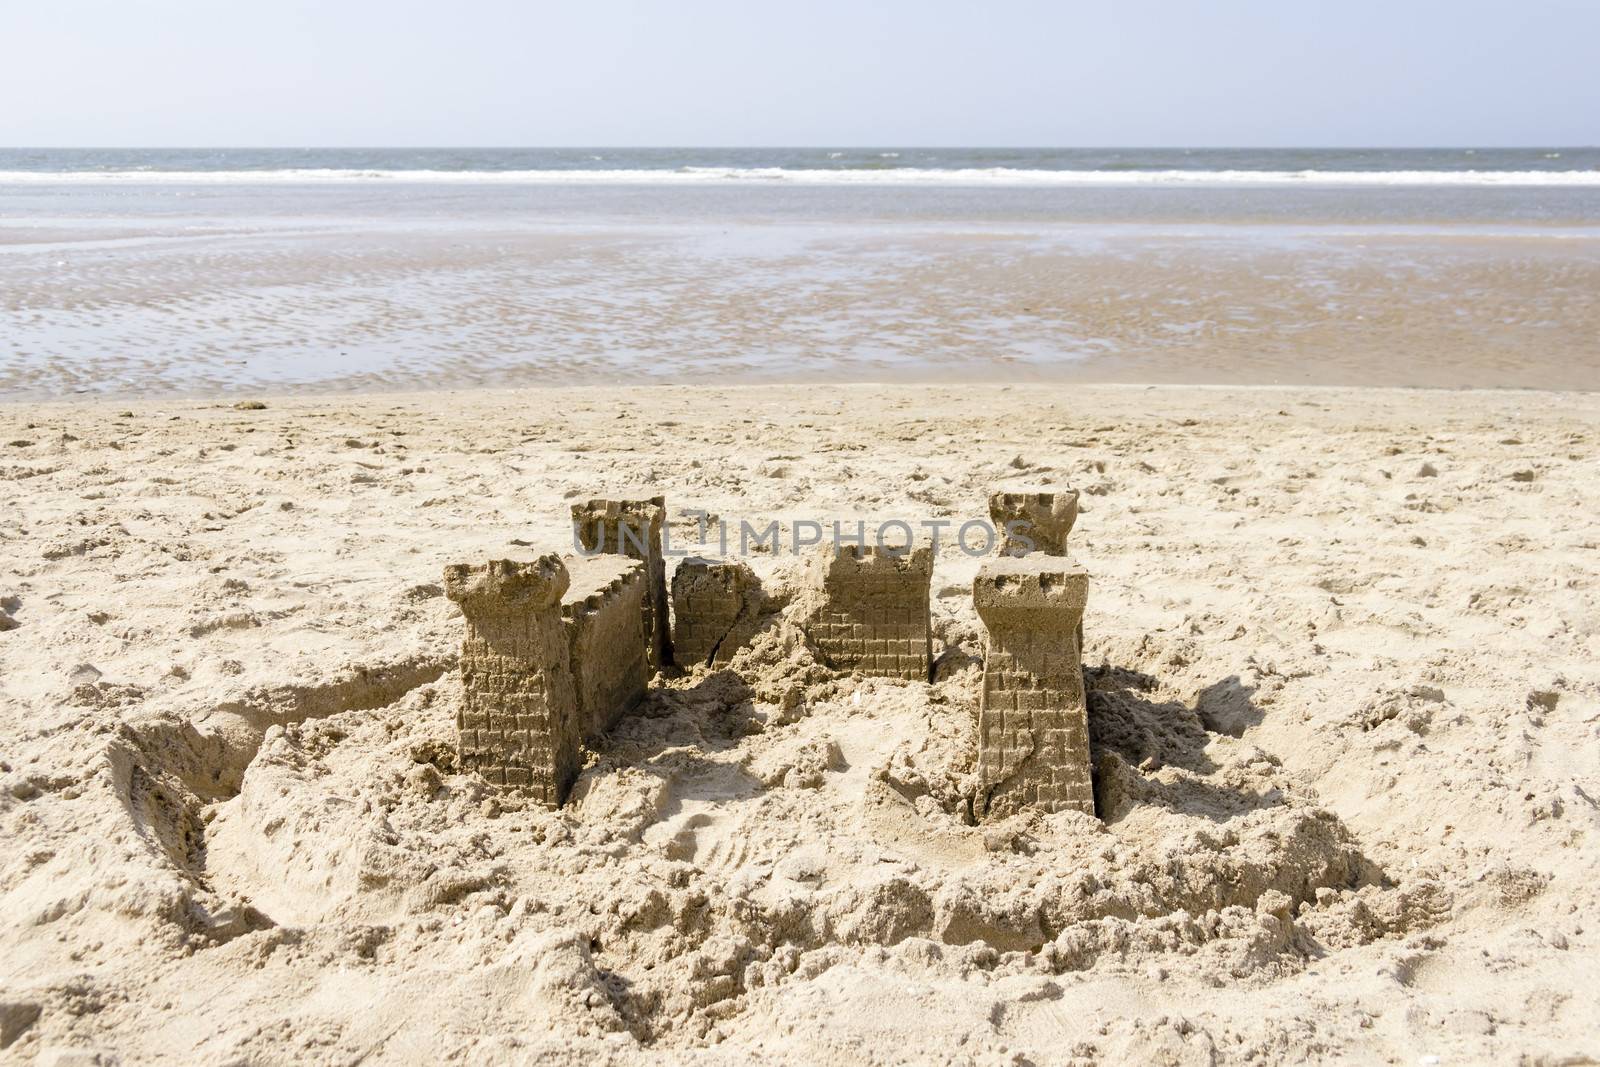 Sand Castle on the Beach, North Sea, Netherlands by Tetyana